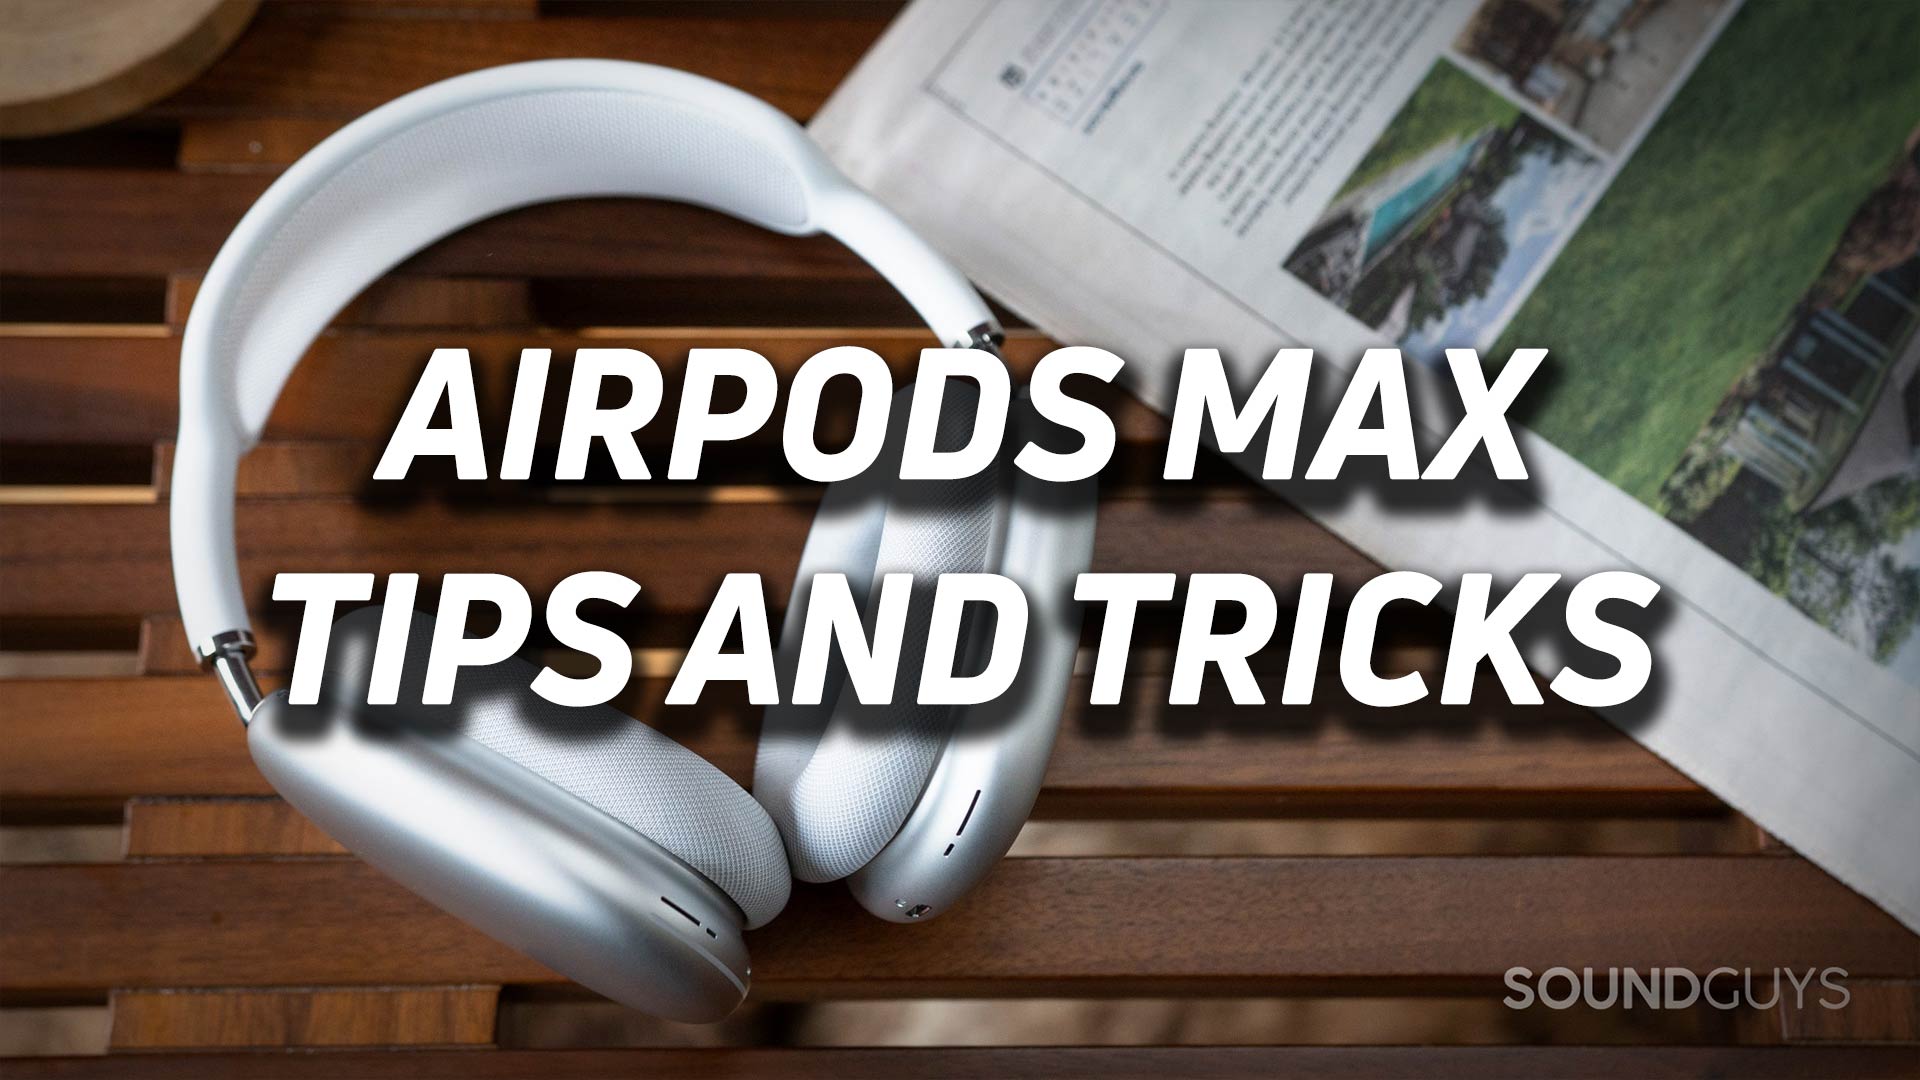 The AirPods Max in white on a wooden bench with the text "AirPods Max tips and tricks" overlaid.